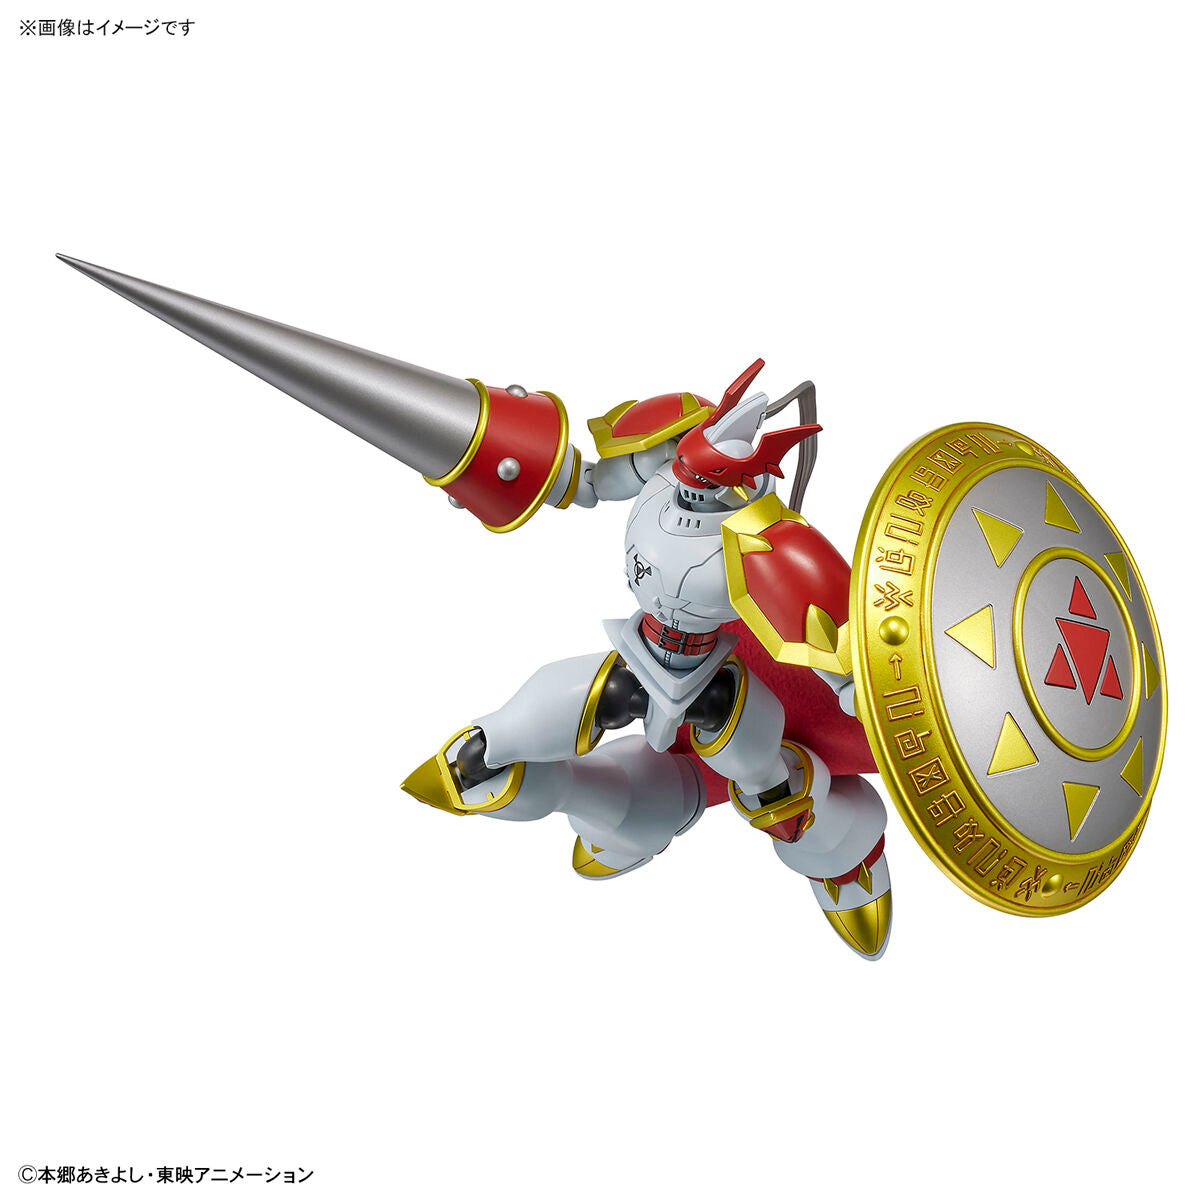 Digimon - Gallantmon - Figure-rise Standard Model Kit, Holy Knight Digimon "Gallantmon" faithfully recreated in model kit form with dynamic action poses, weapons in silver color, and detailed engraving of Digicode on the "Aegis Shield", Nippon Figures